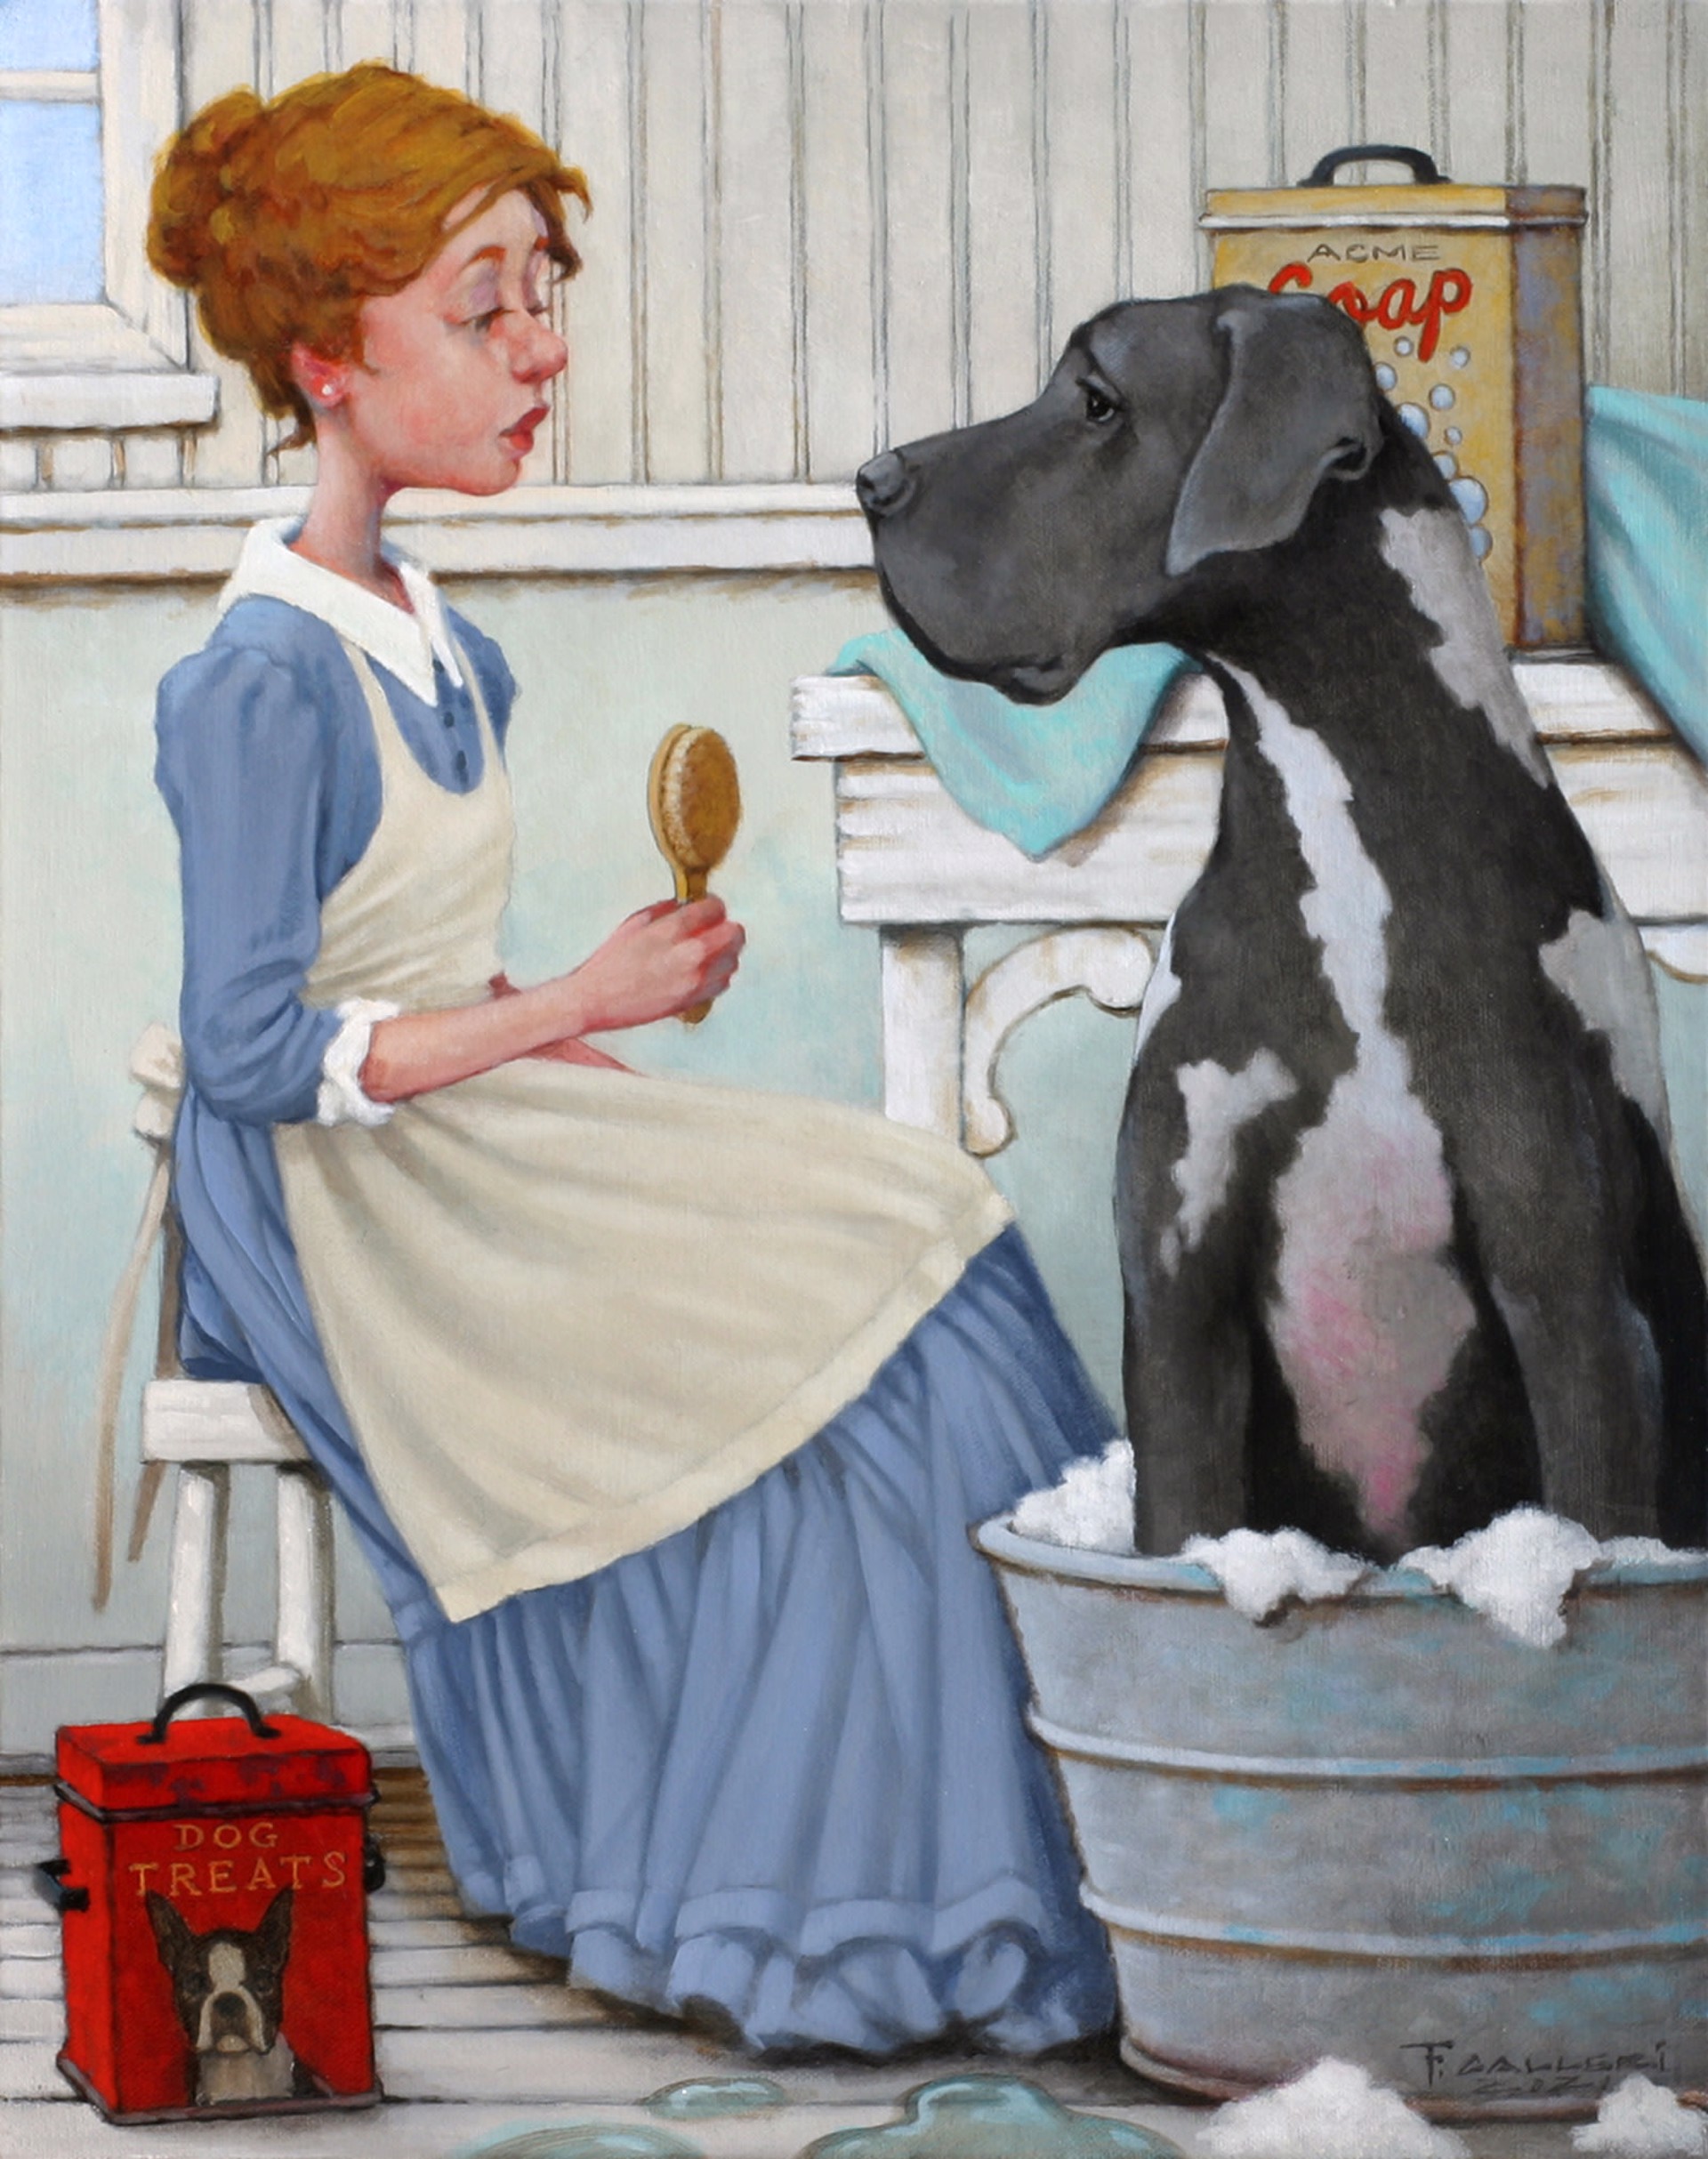 Carrot and Stick by Fred Calleri